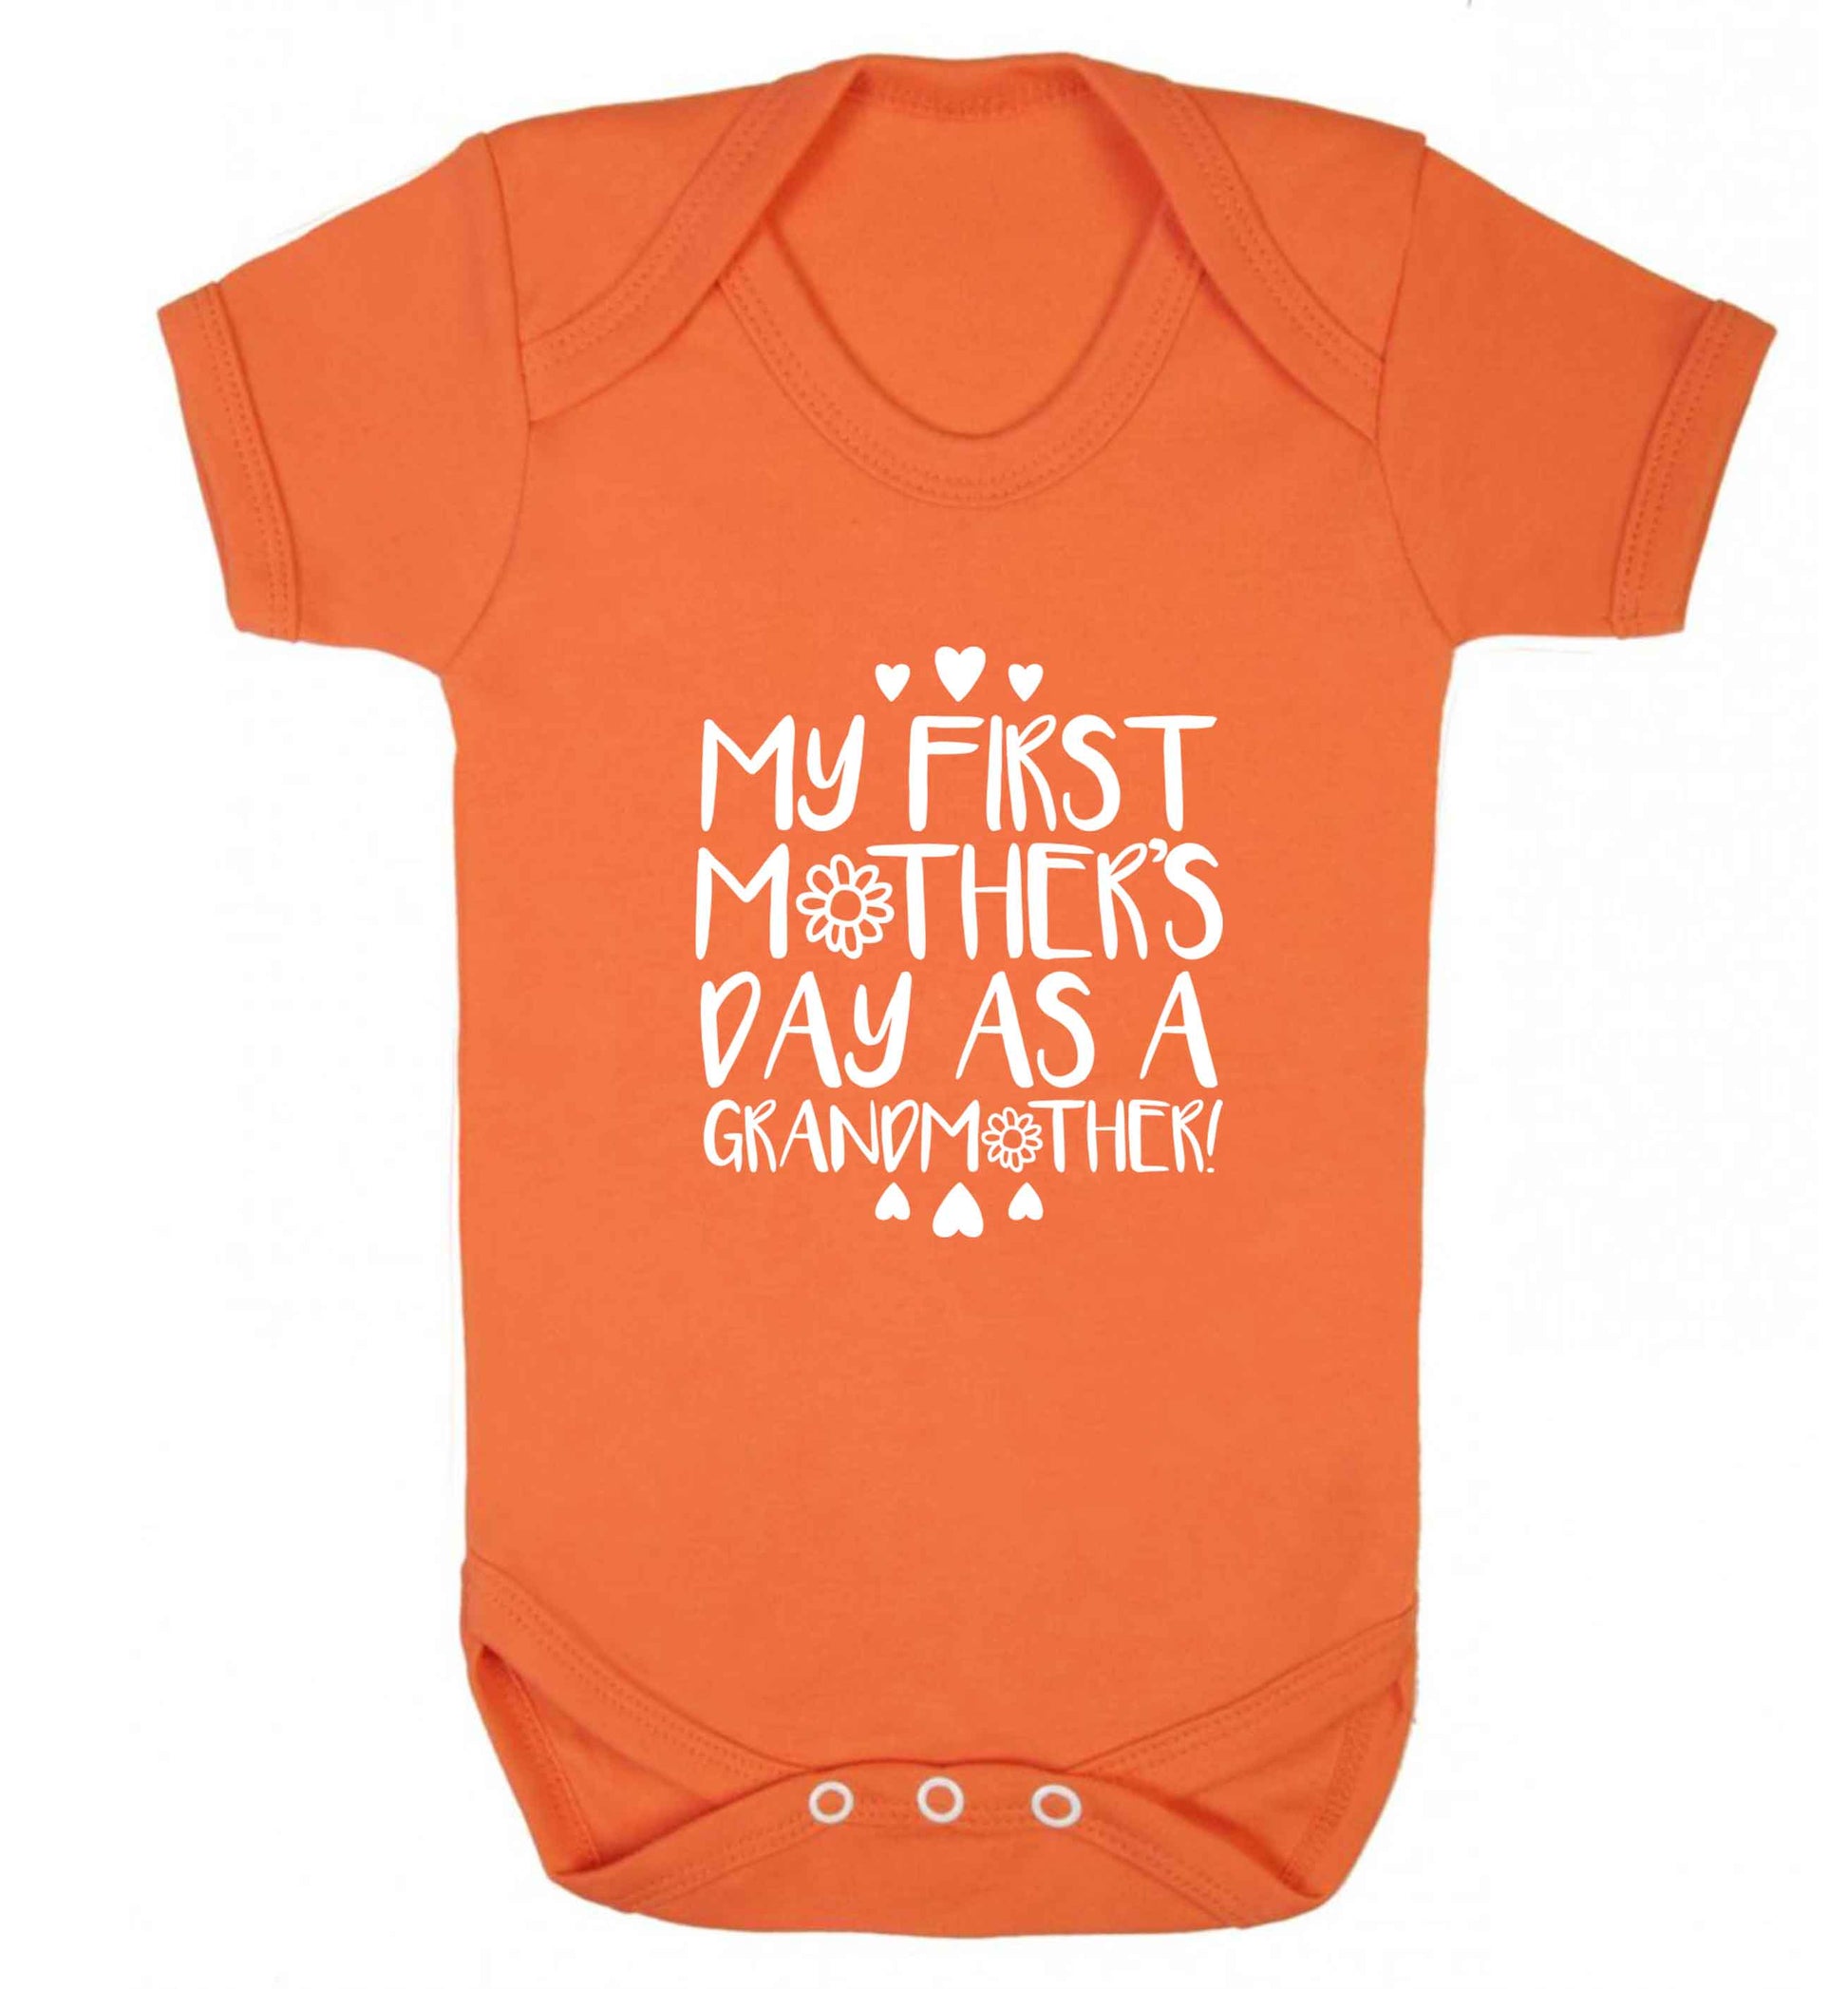 It's my first mother's day as a grandmother baby vest orange 18-24 months